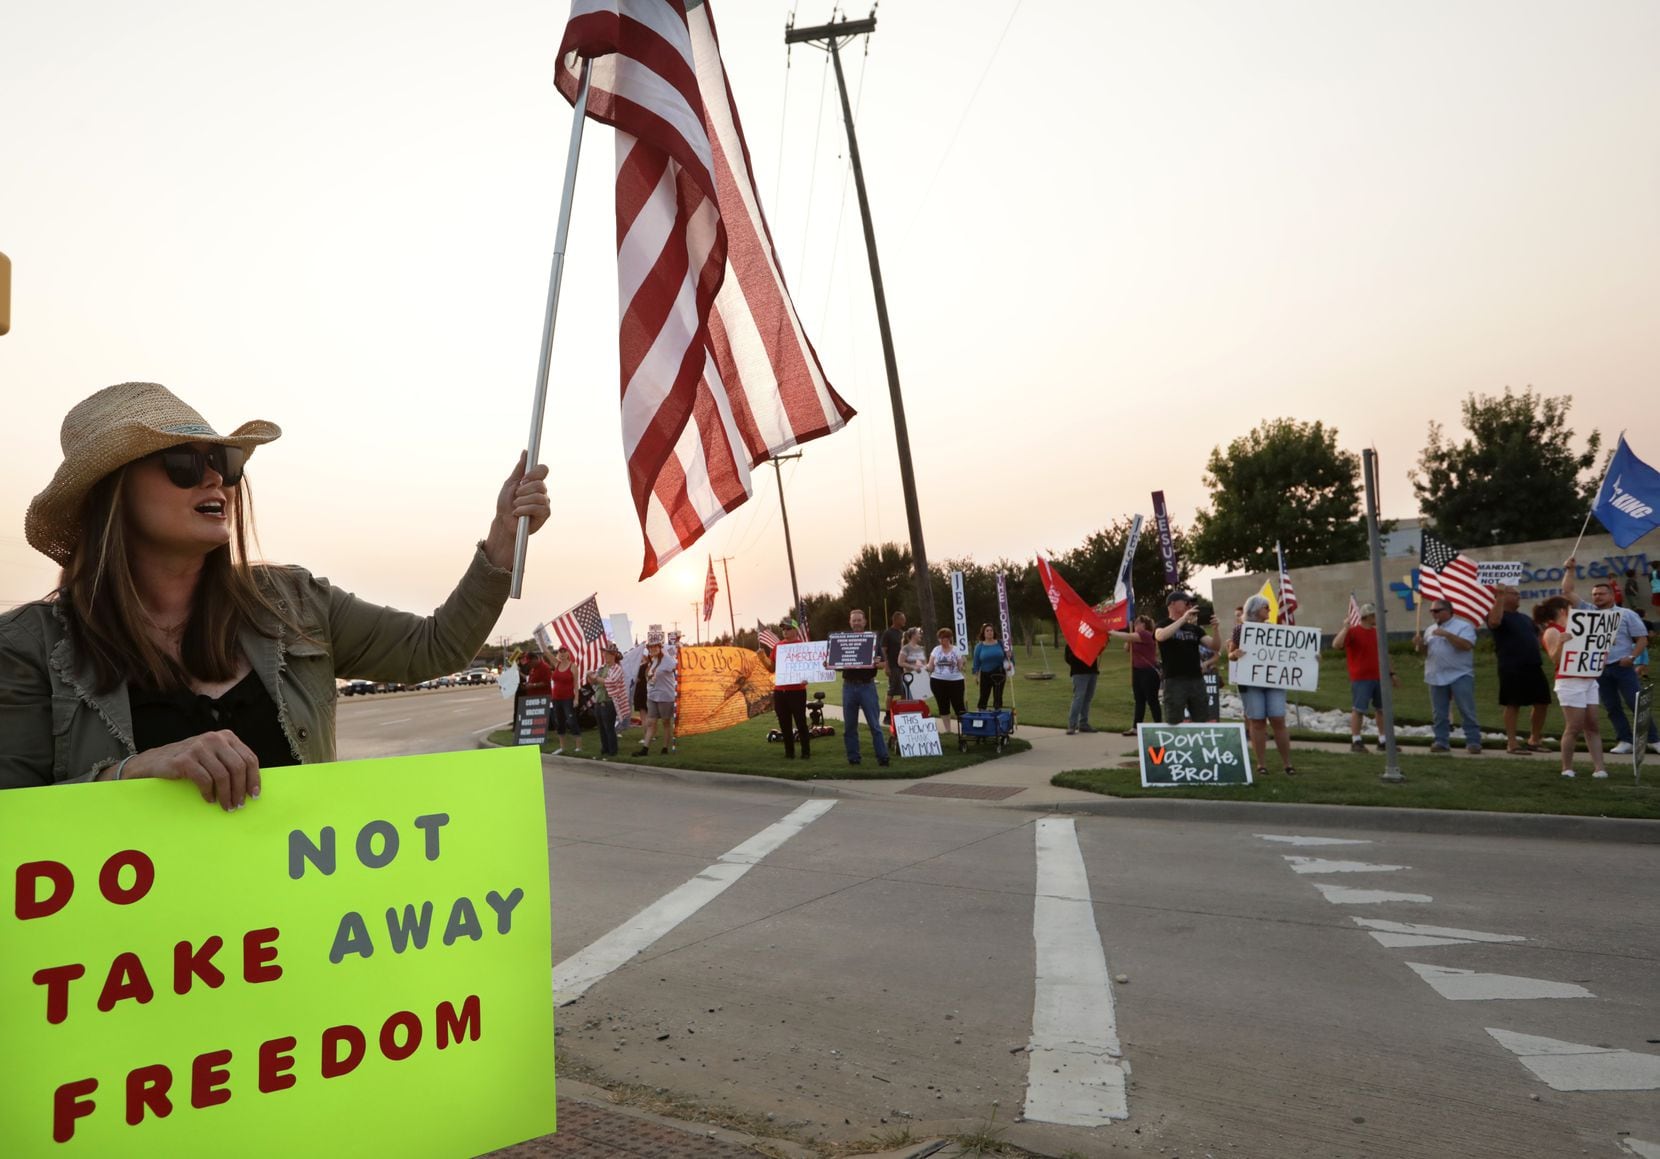 Dozens of demonstrators gathered along the road near the Baylor Scott and White hospital campus in McKinney to protest vaccine mandates on Friday, Sept. 10, 2021.